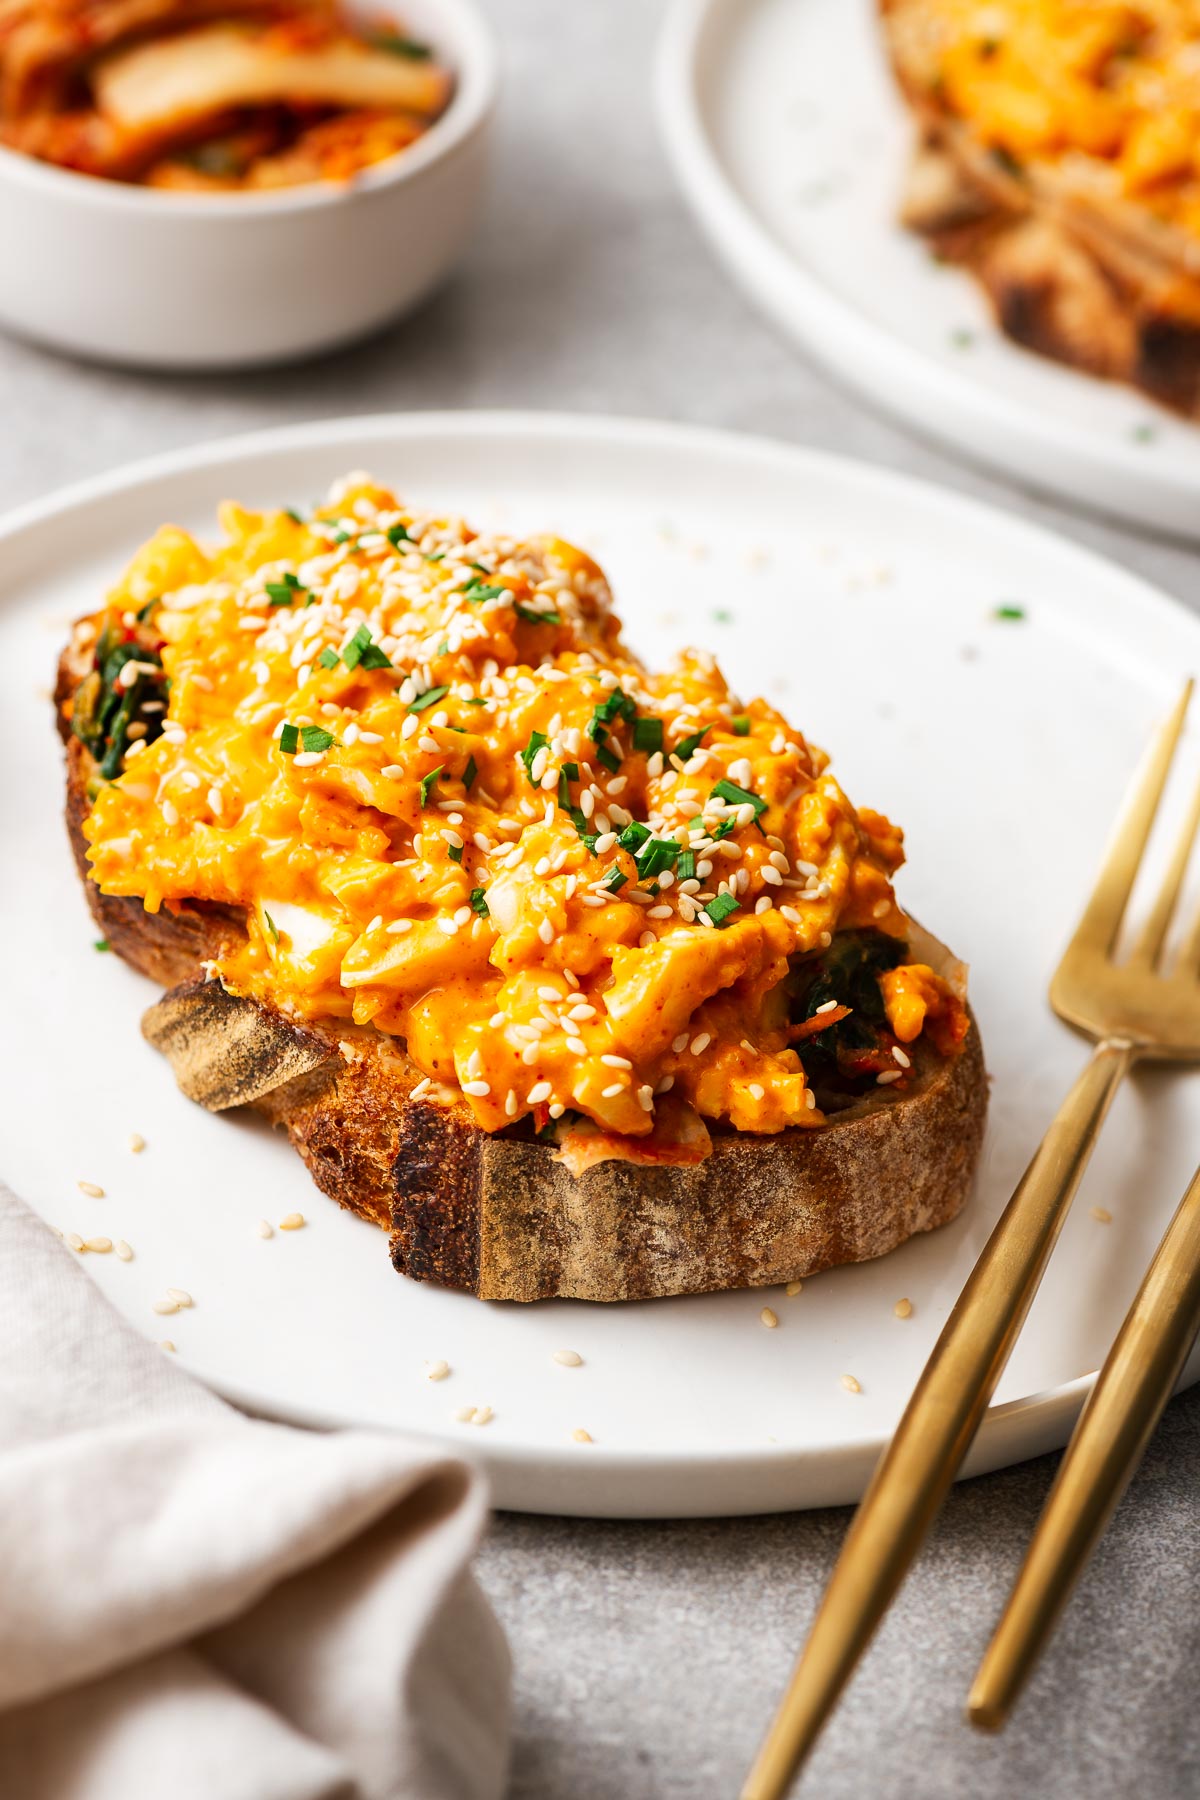 Spicy Gochujang Eggs: Perfect On Toast Or Rice